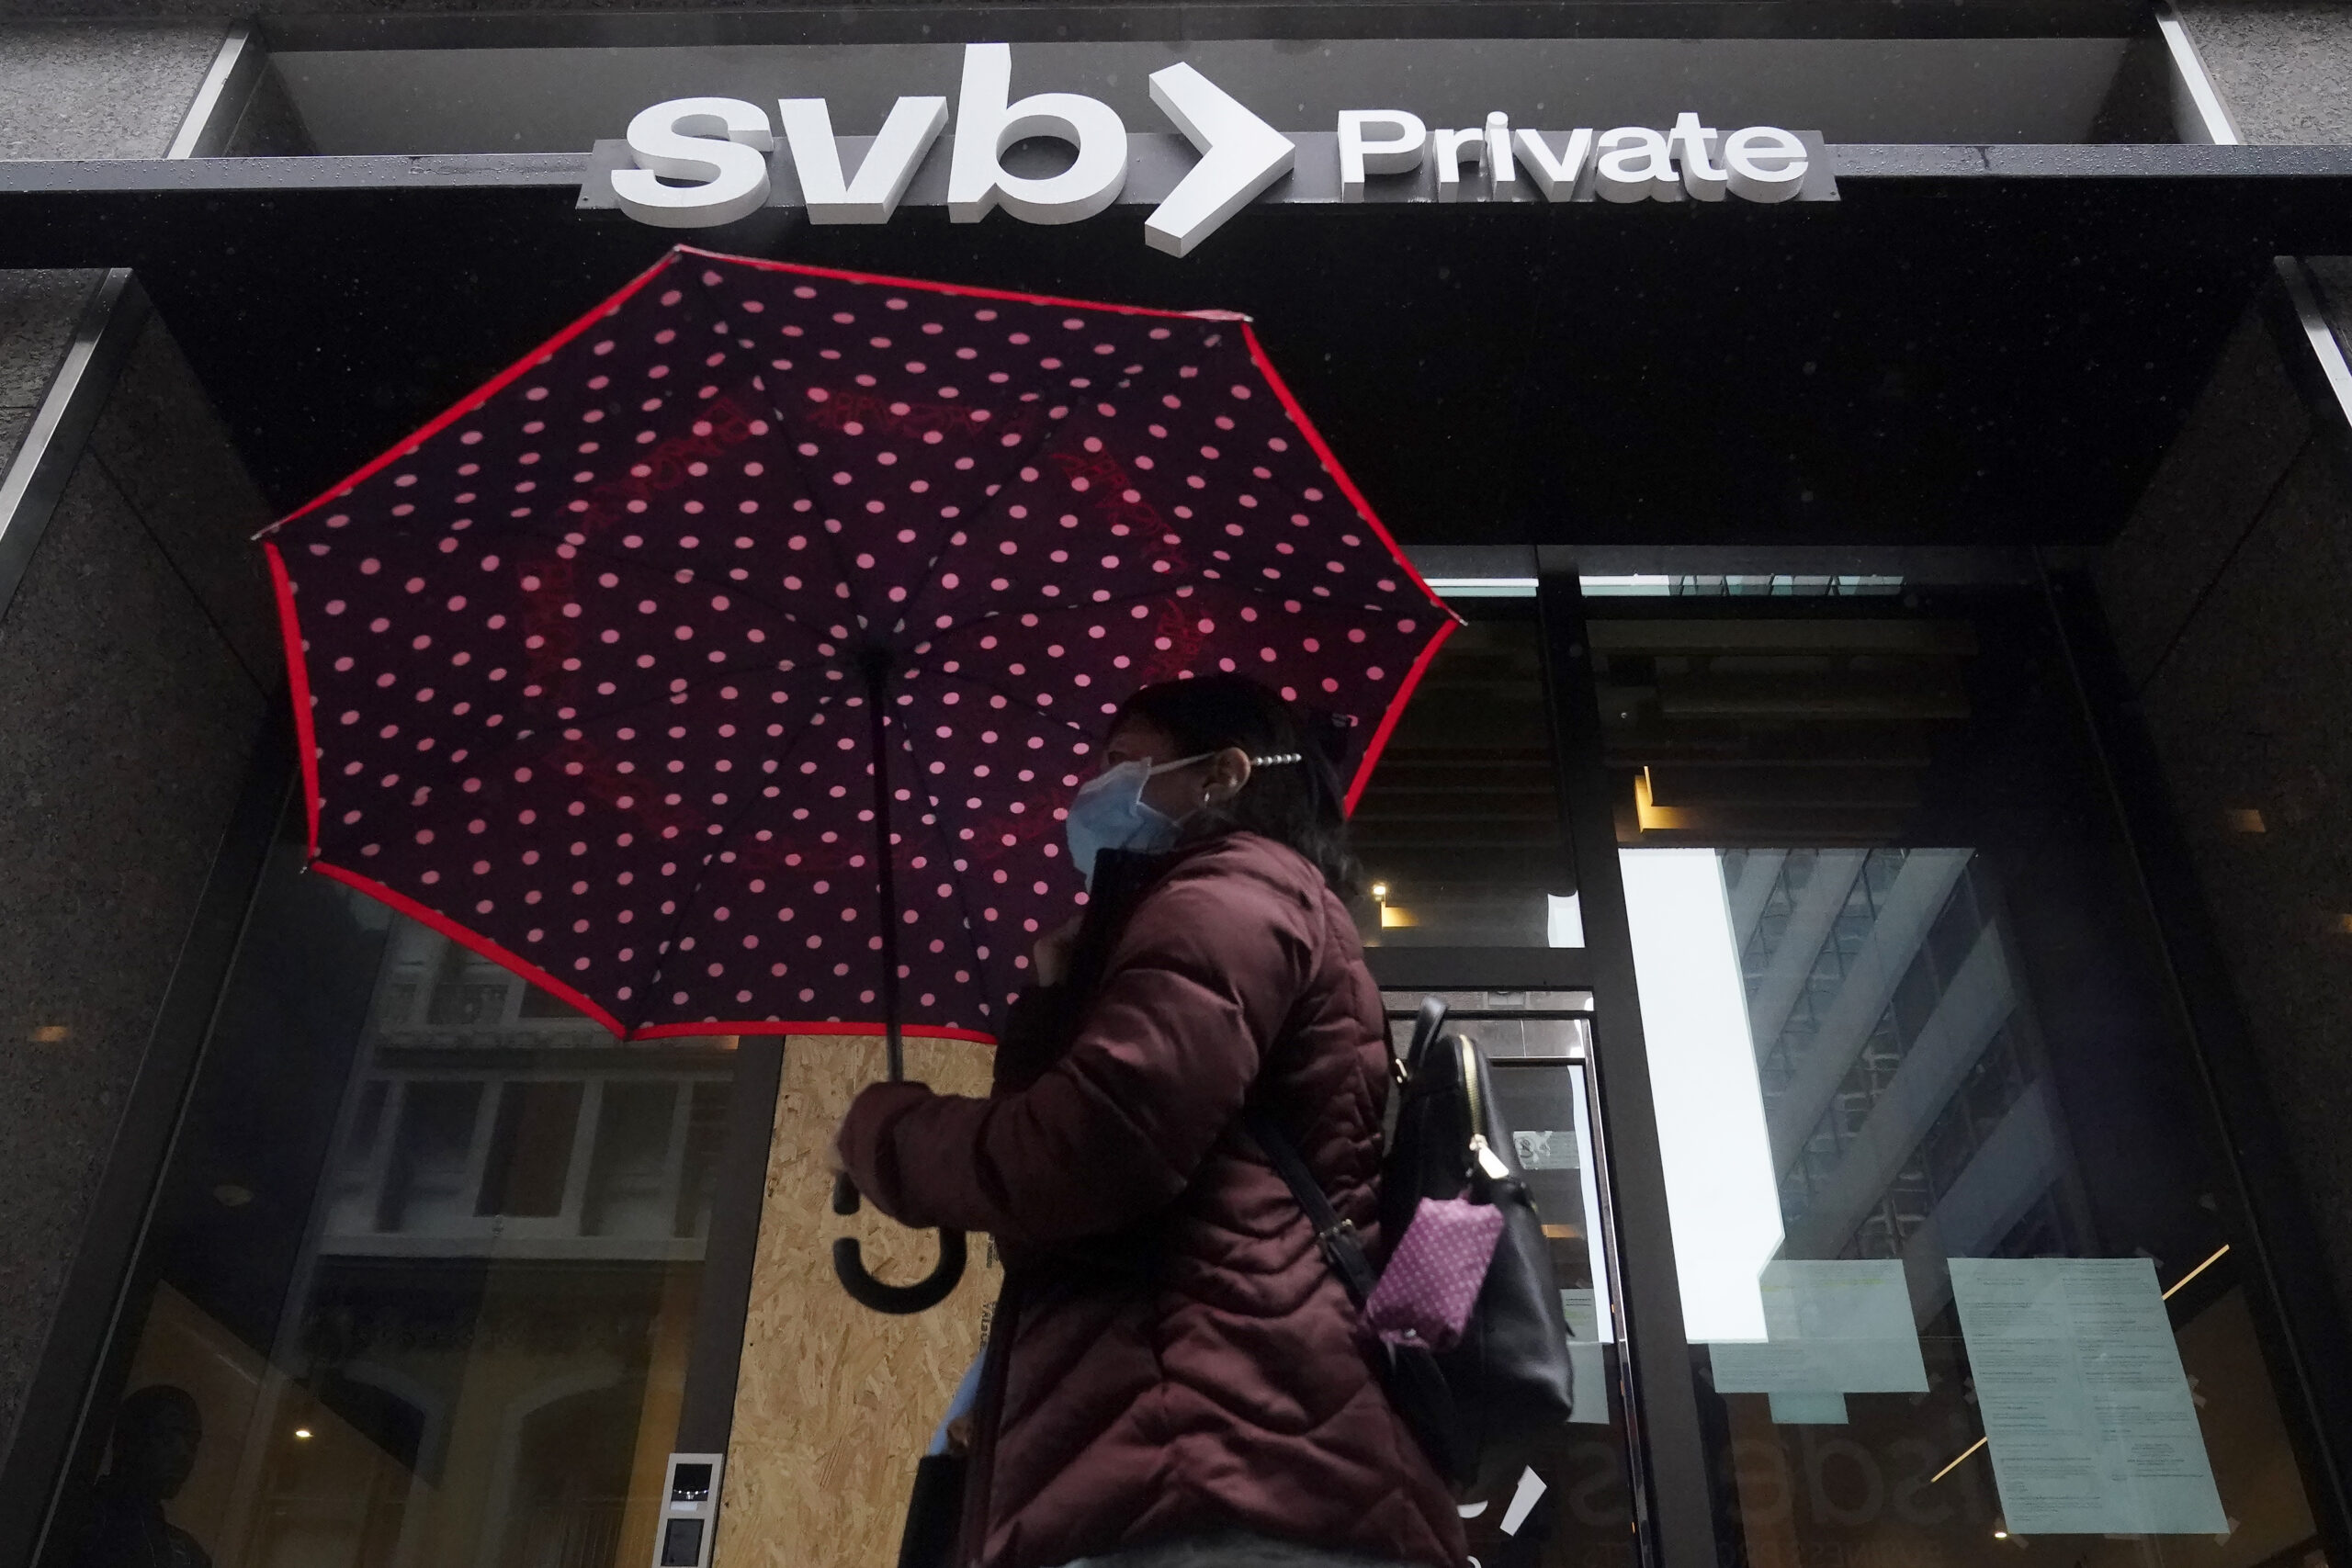 A pedestrian carries an umbrella while walking past a Silicon Valley Bank Private branch in San Fra...